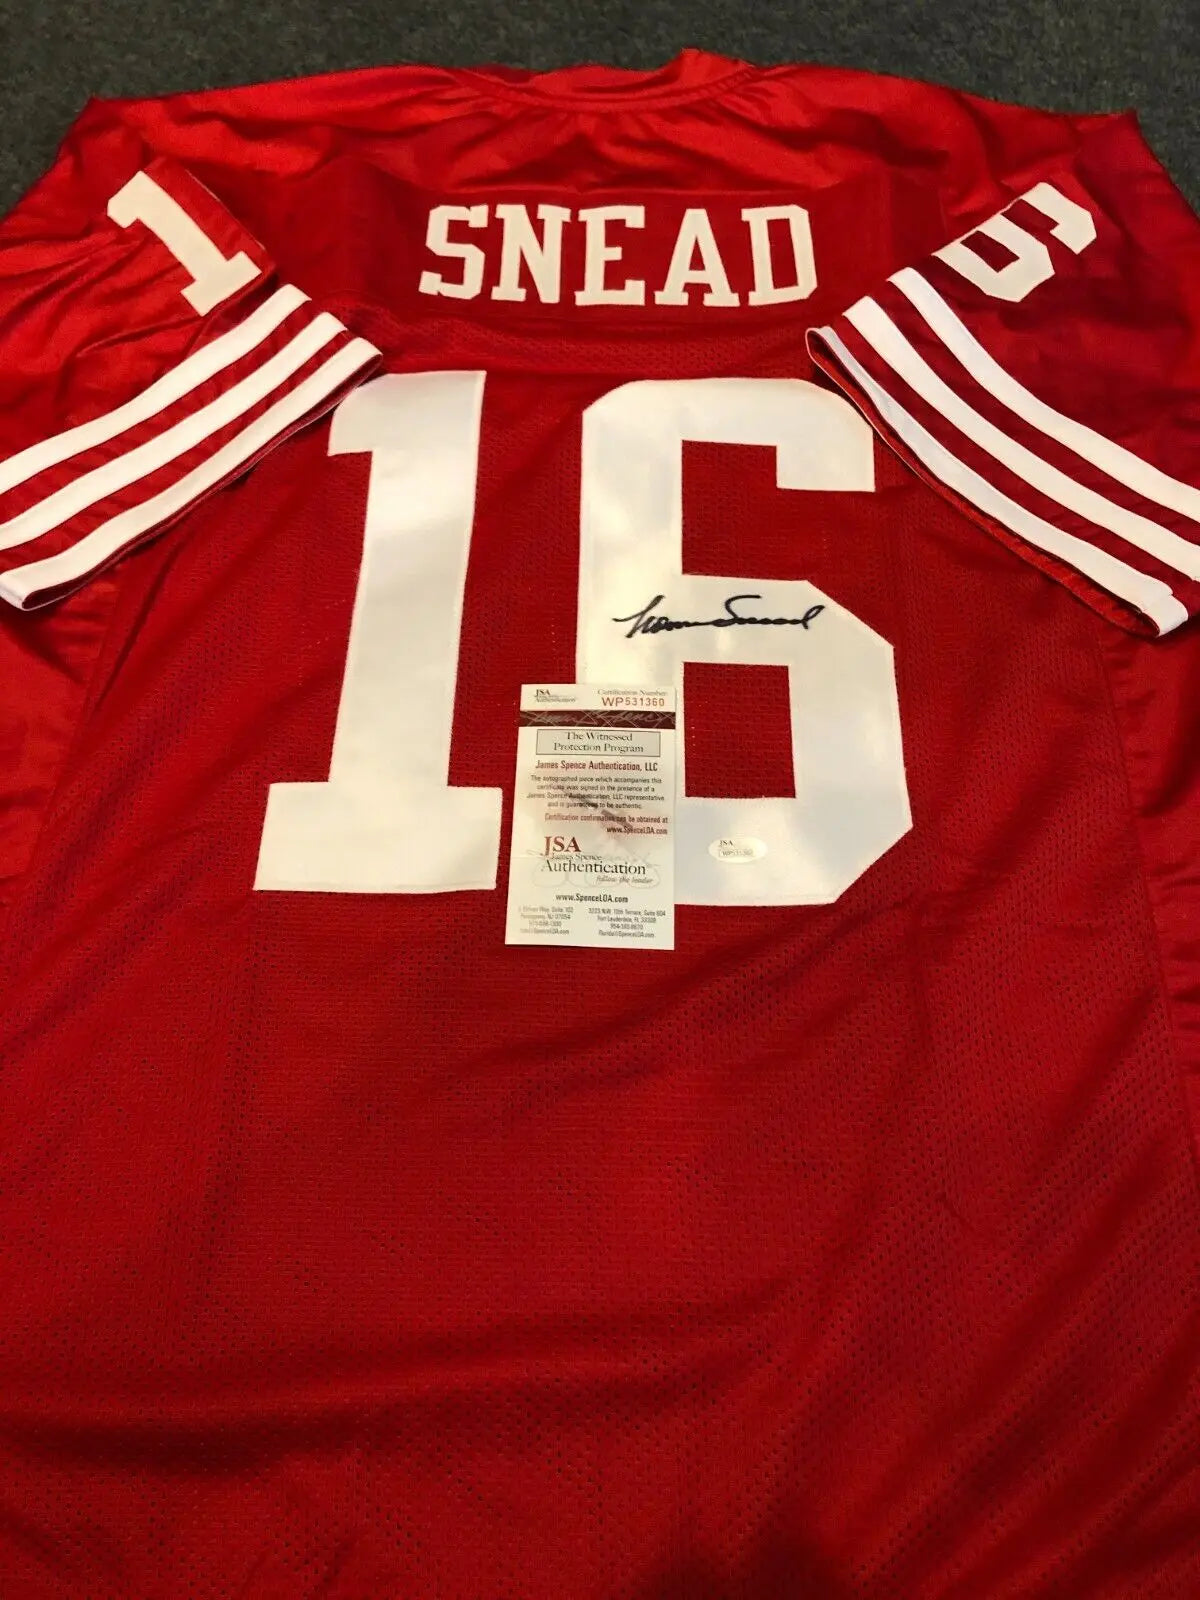 MVP Authentics S.F. 49Ers Norm Snead Autographed Signed Jersey Jsa Coa 89.10 sports jersey framing , jersey framing